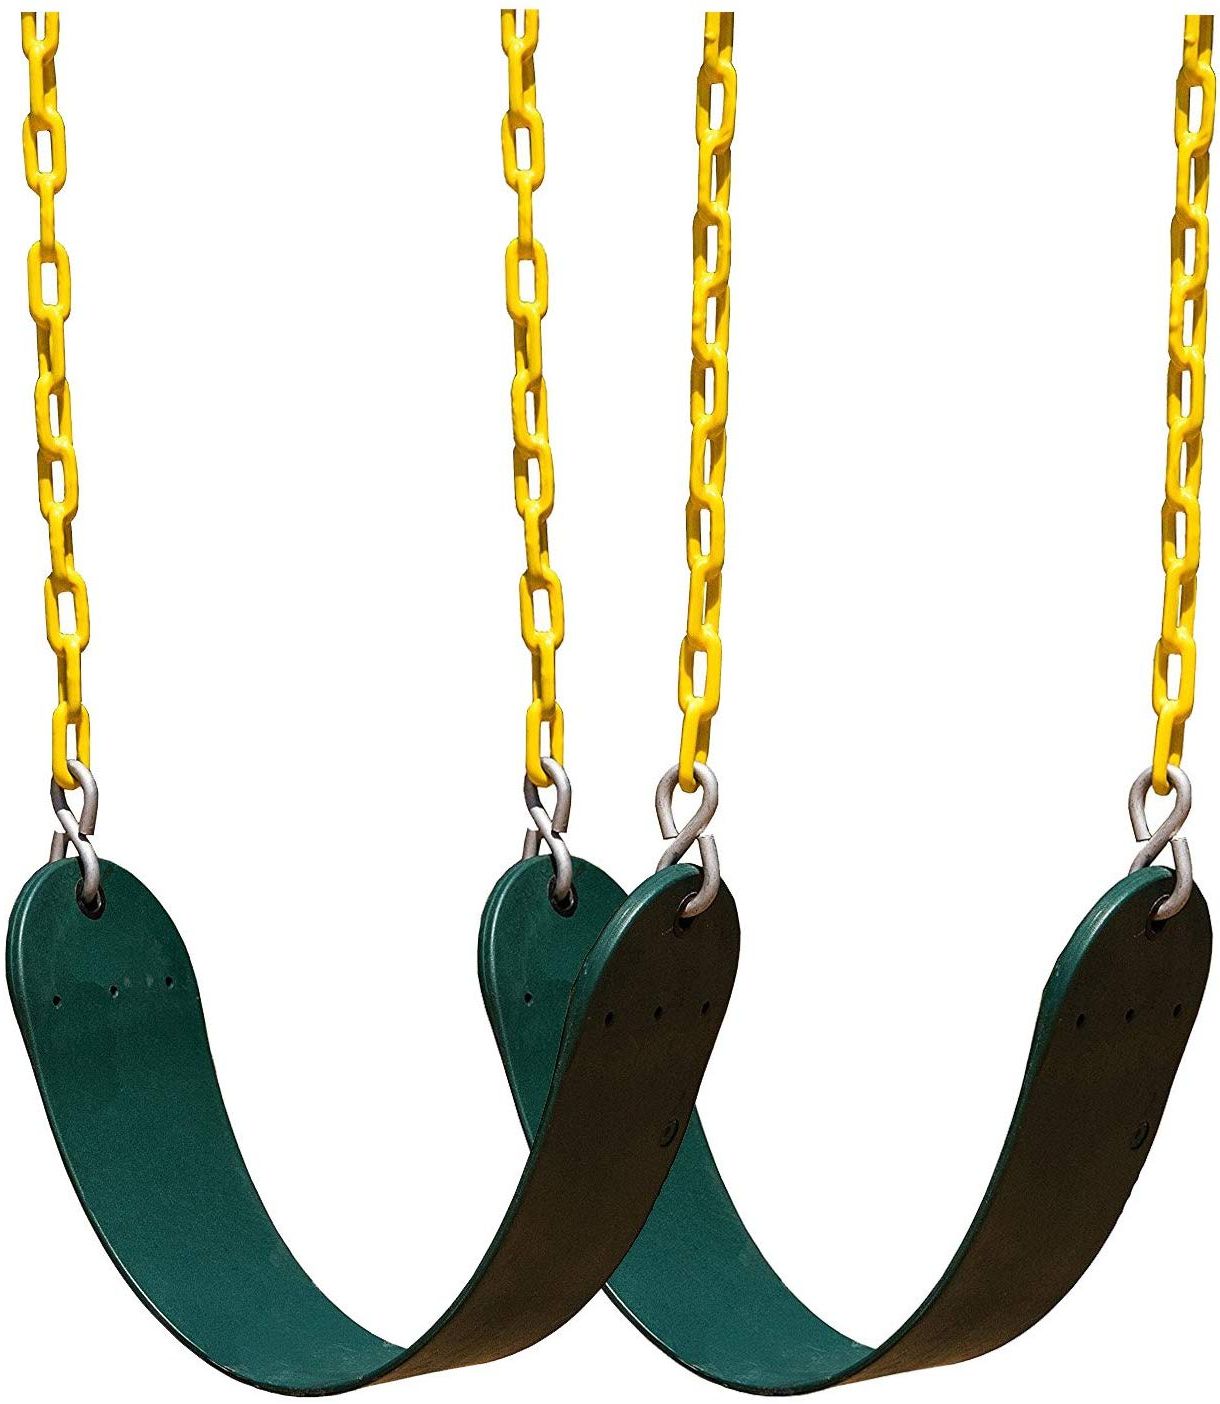 Latest Squirrel Products 2 Pack Heavy Duty Swing Seat – 66" Chain Plastic Coated –  Playground Swing Set Accessories Swing Seat Replacement – Green Within Swing Seats With Chains (View 22 of 30)